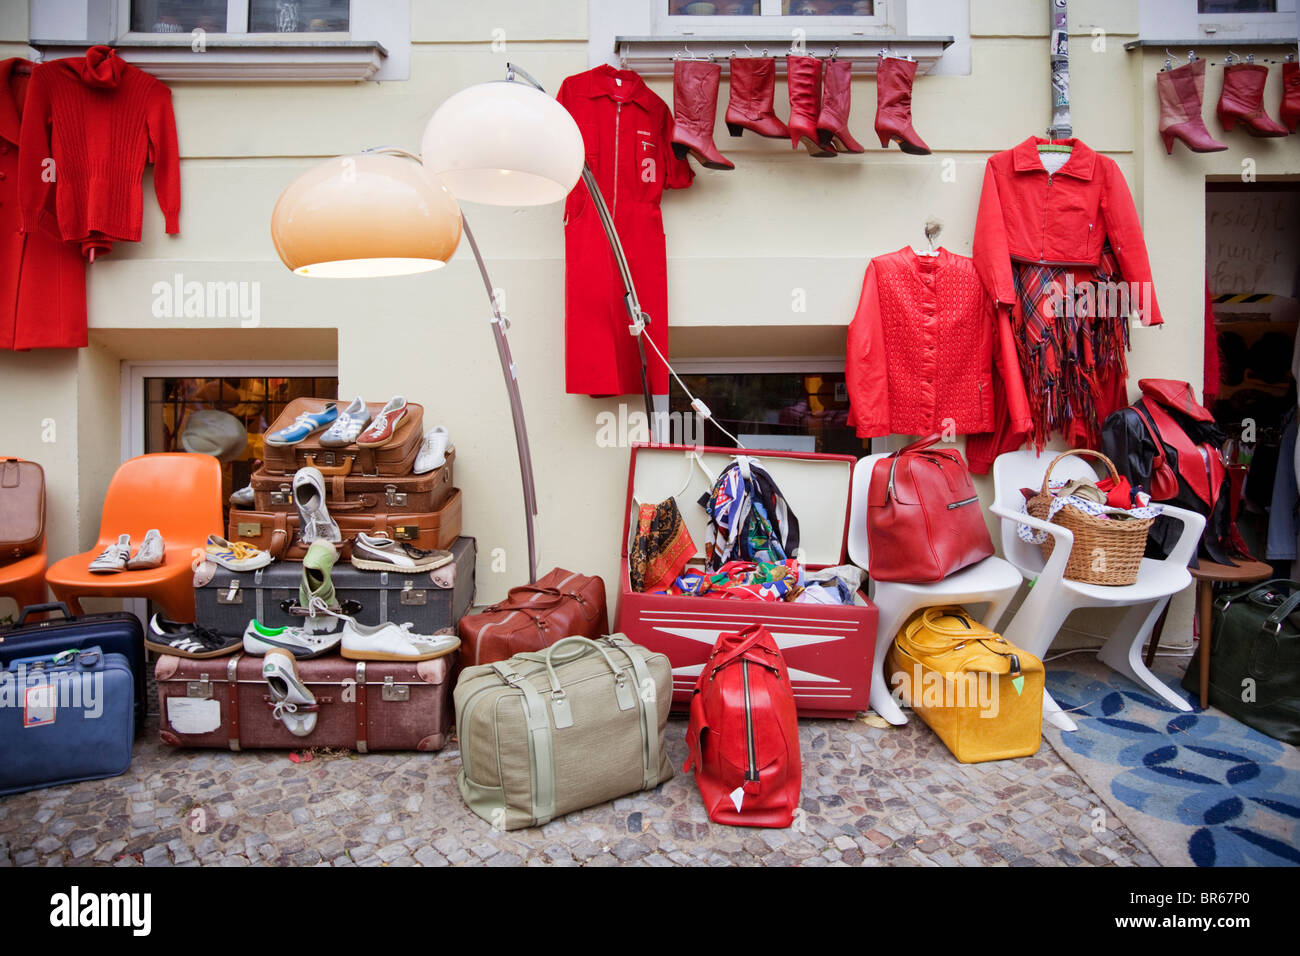 Colorful Display Of Vintage Clothing And Bric A Brac Outside A Shop Stock Photo Alamy